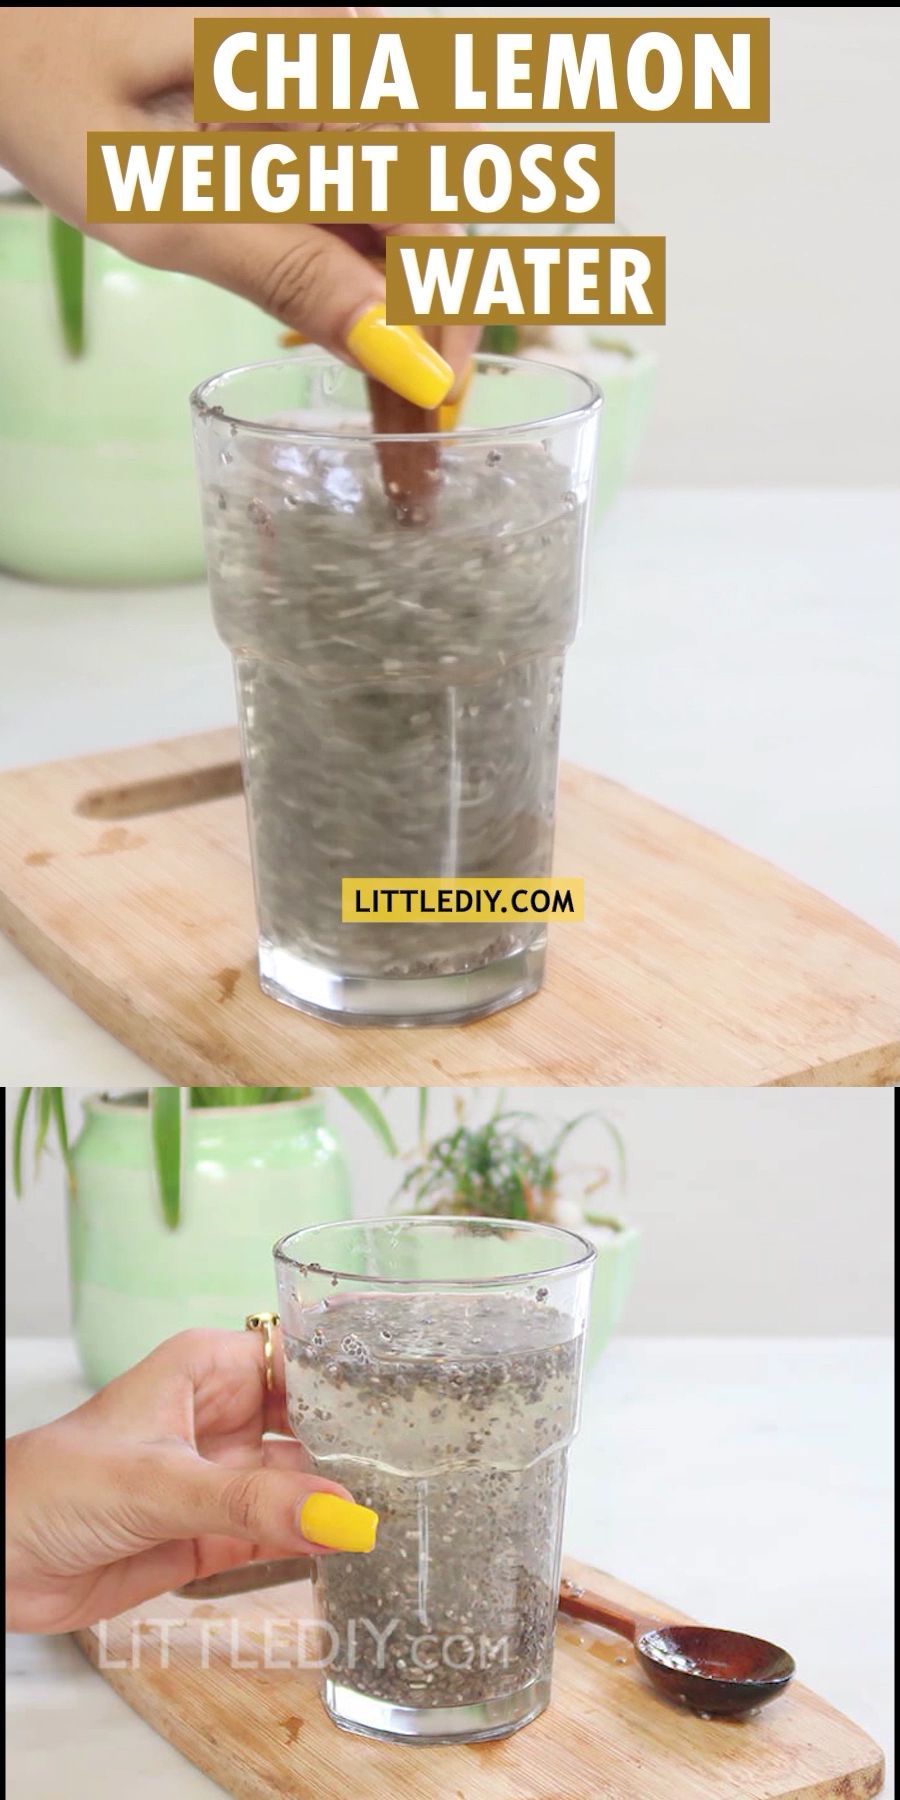 Chia water for weight loss - little diy -   15 diet weight loss drinks ideas